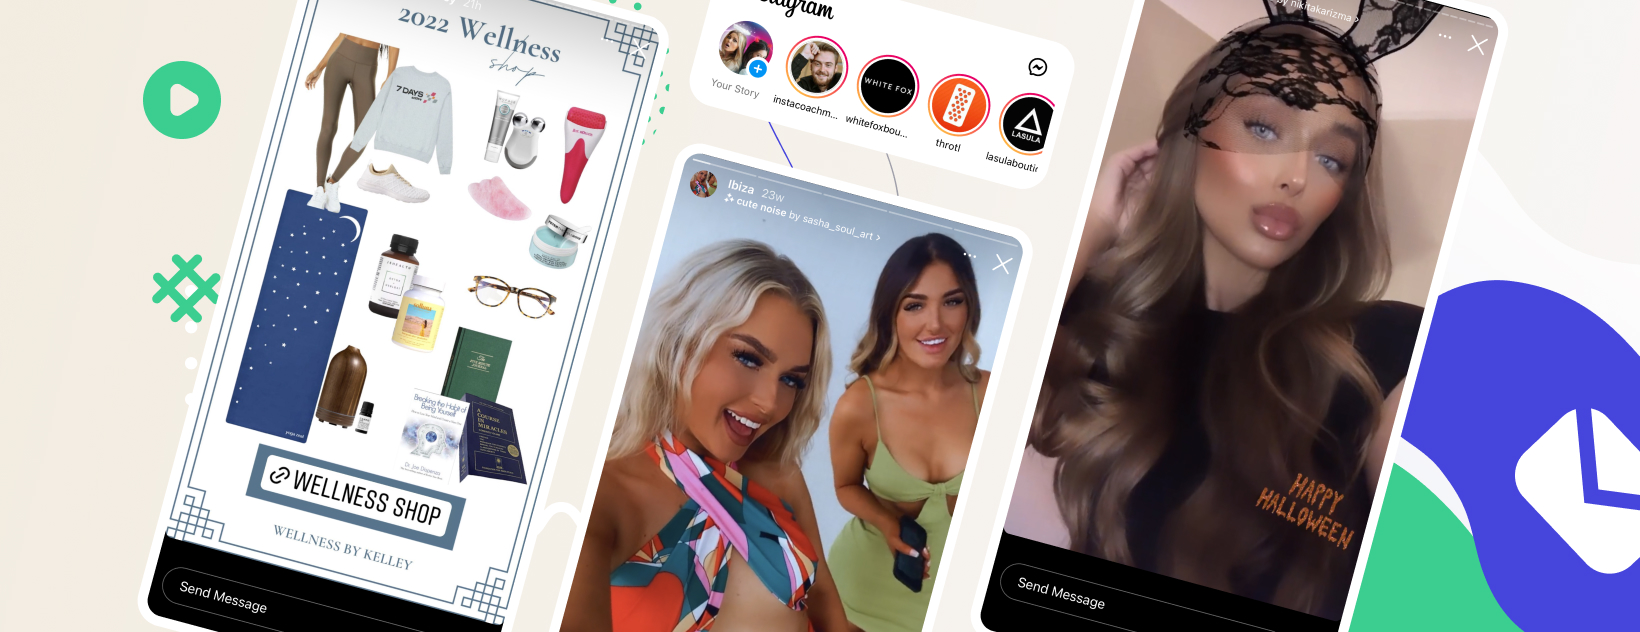 Instagram Story trends for 2022: new social media philosophy to get followers